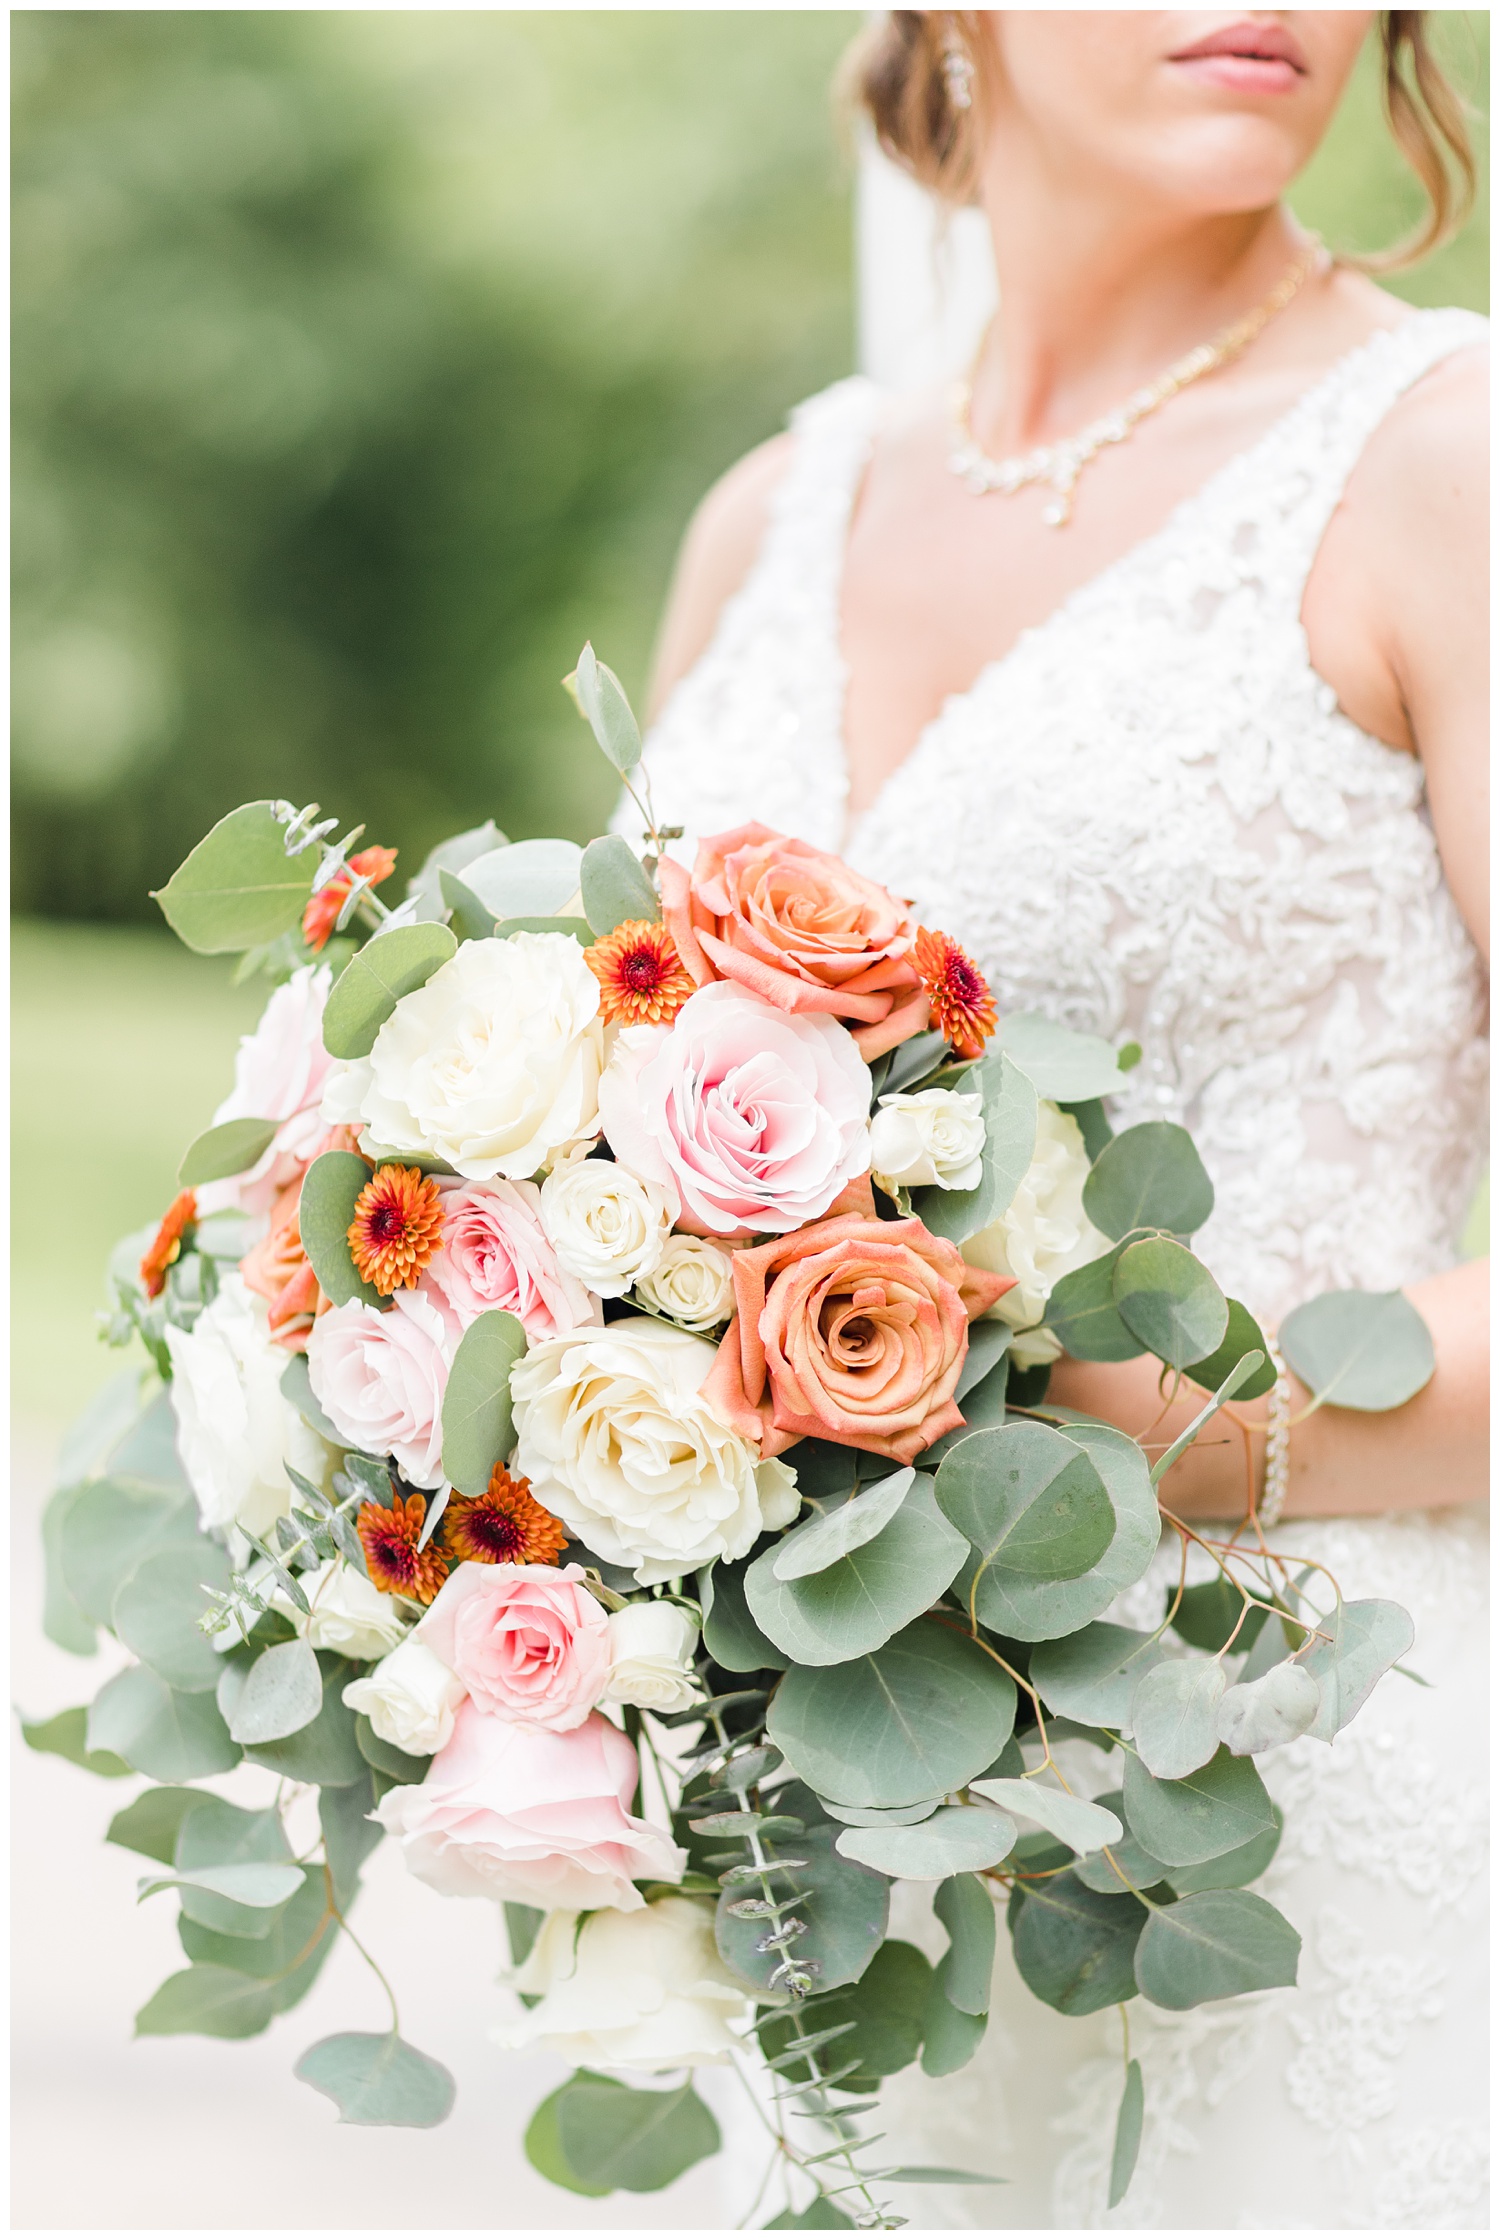 Renee's bridal bouquet featuring white, light pink and dusty orange roses as well as eucalyptus | CB Studio